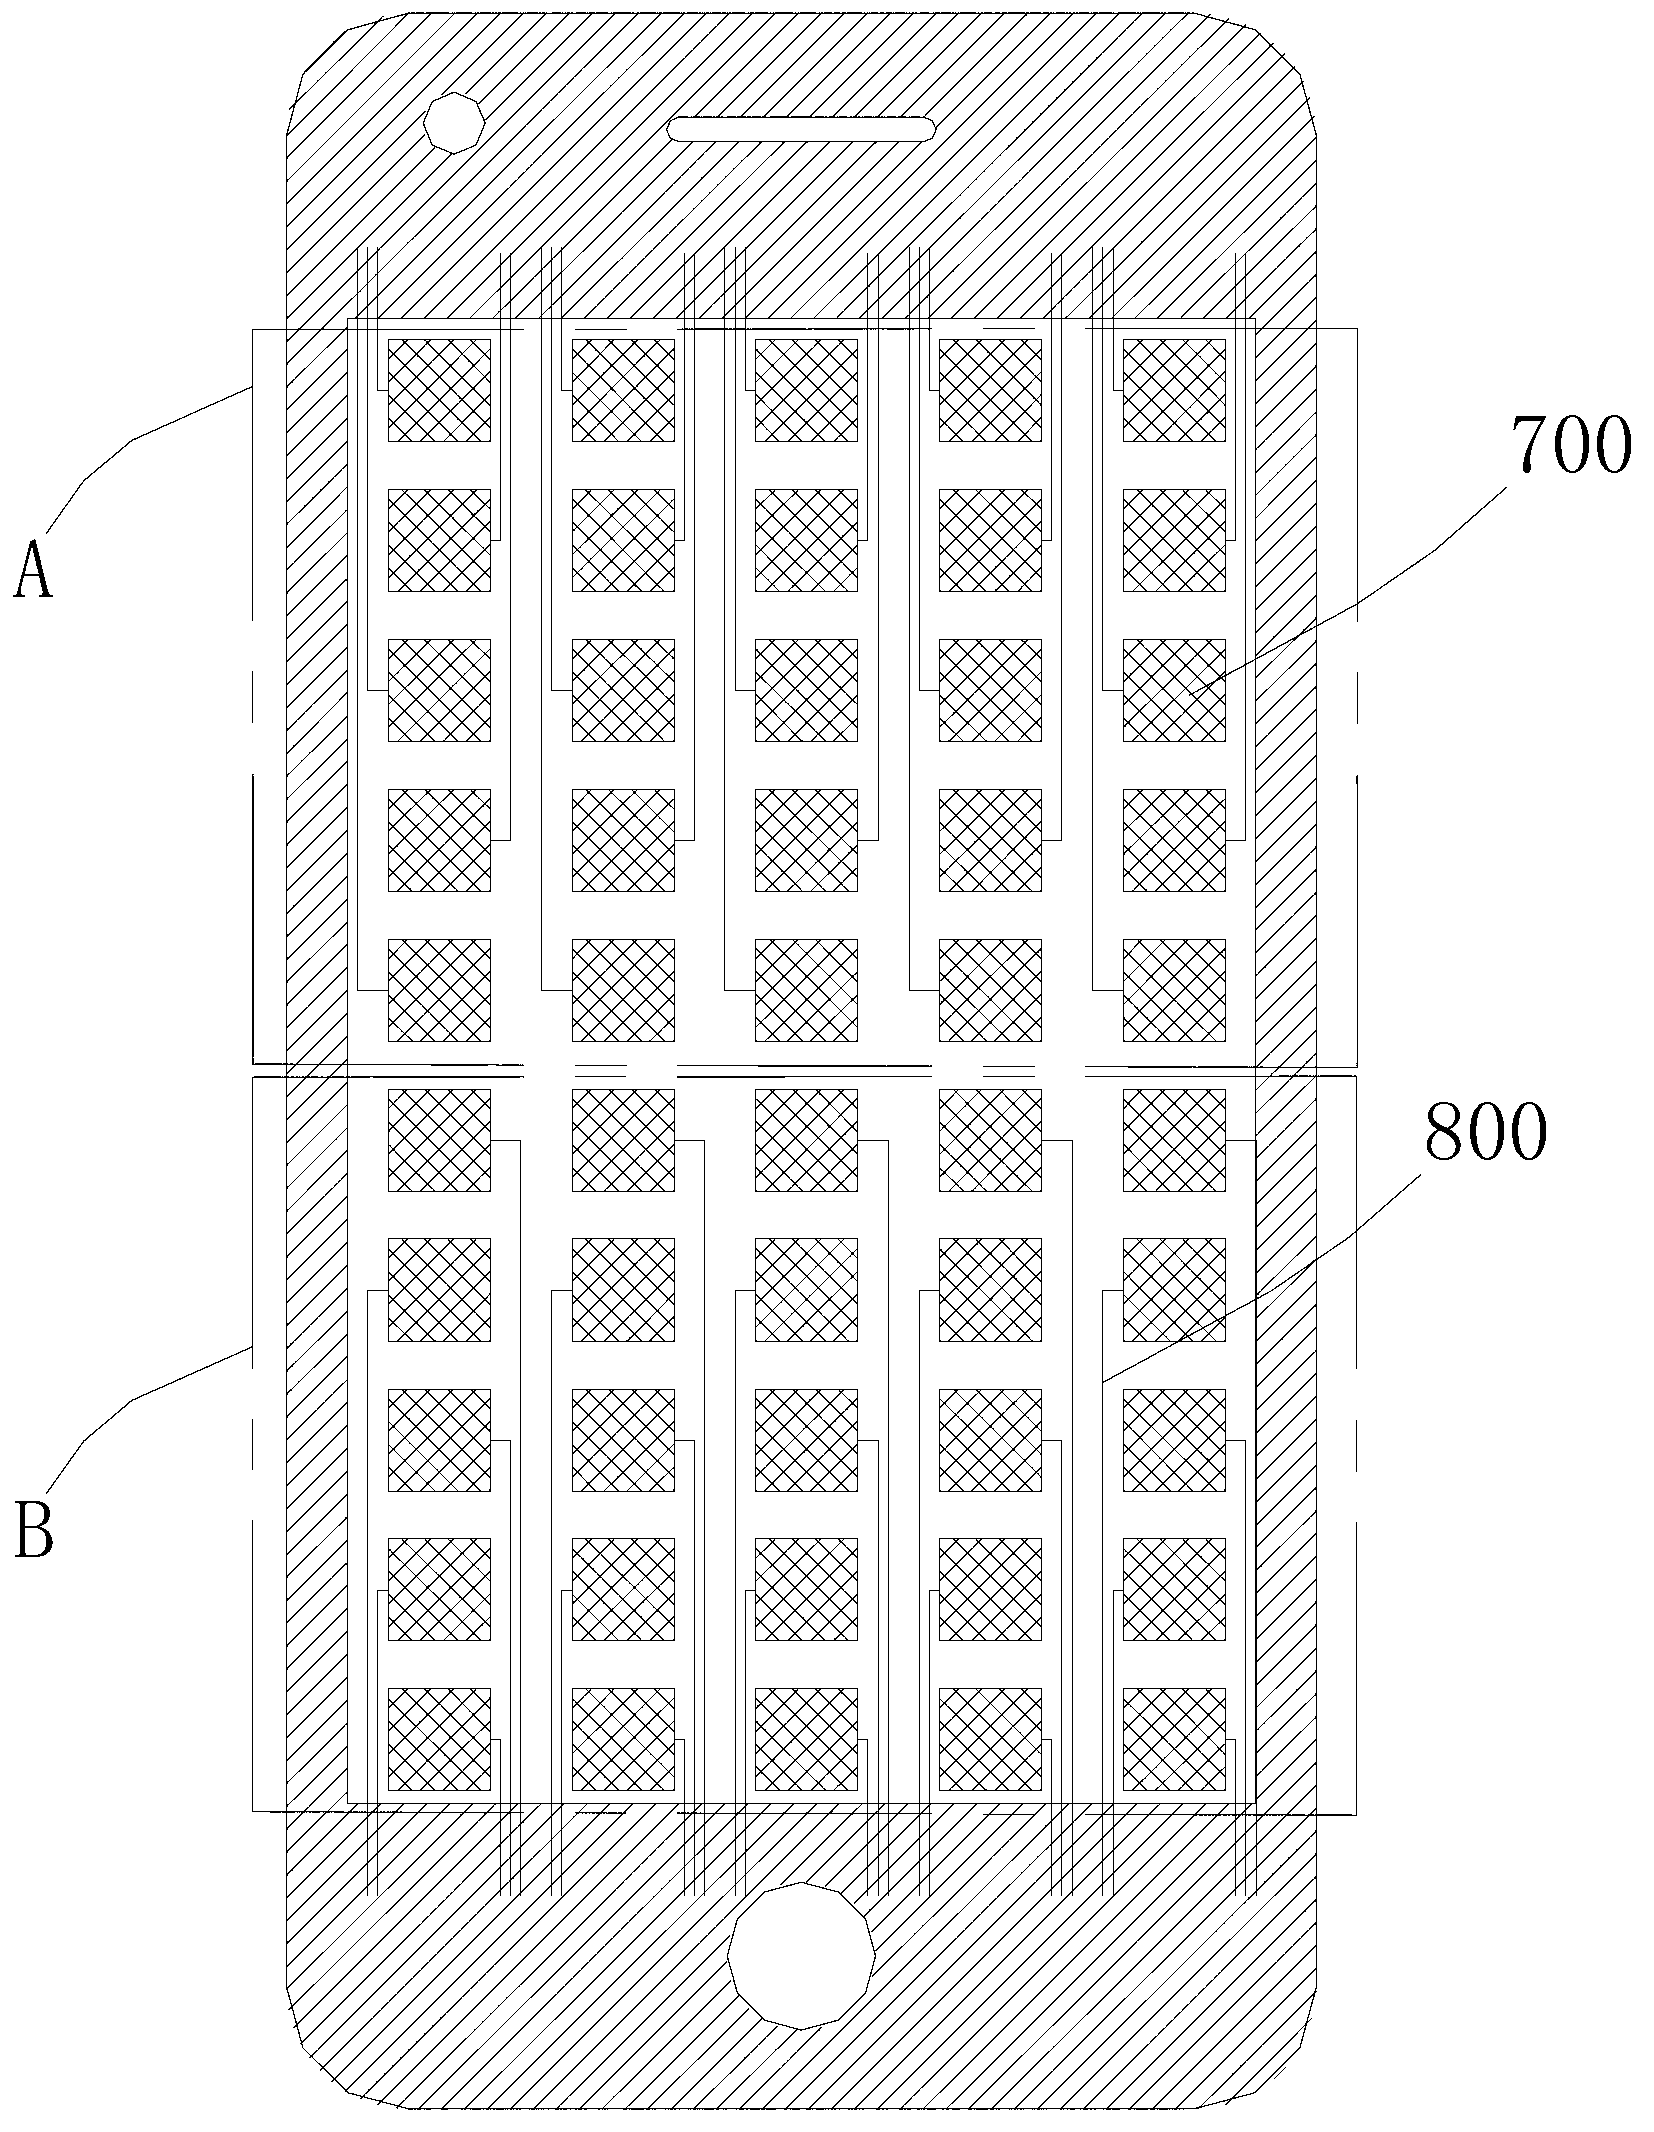 Single-layer multi-point capacitive touch screen